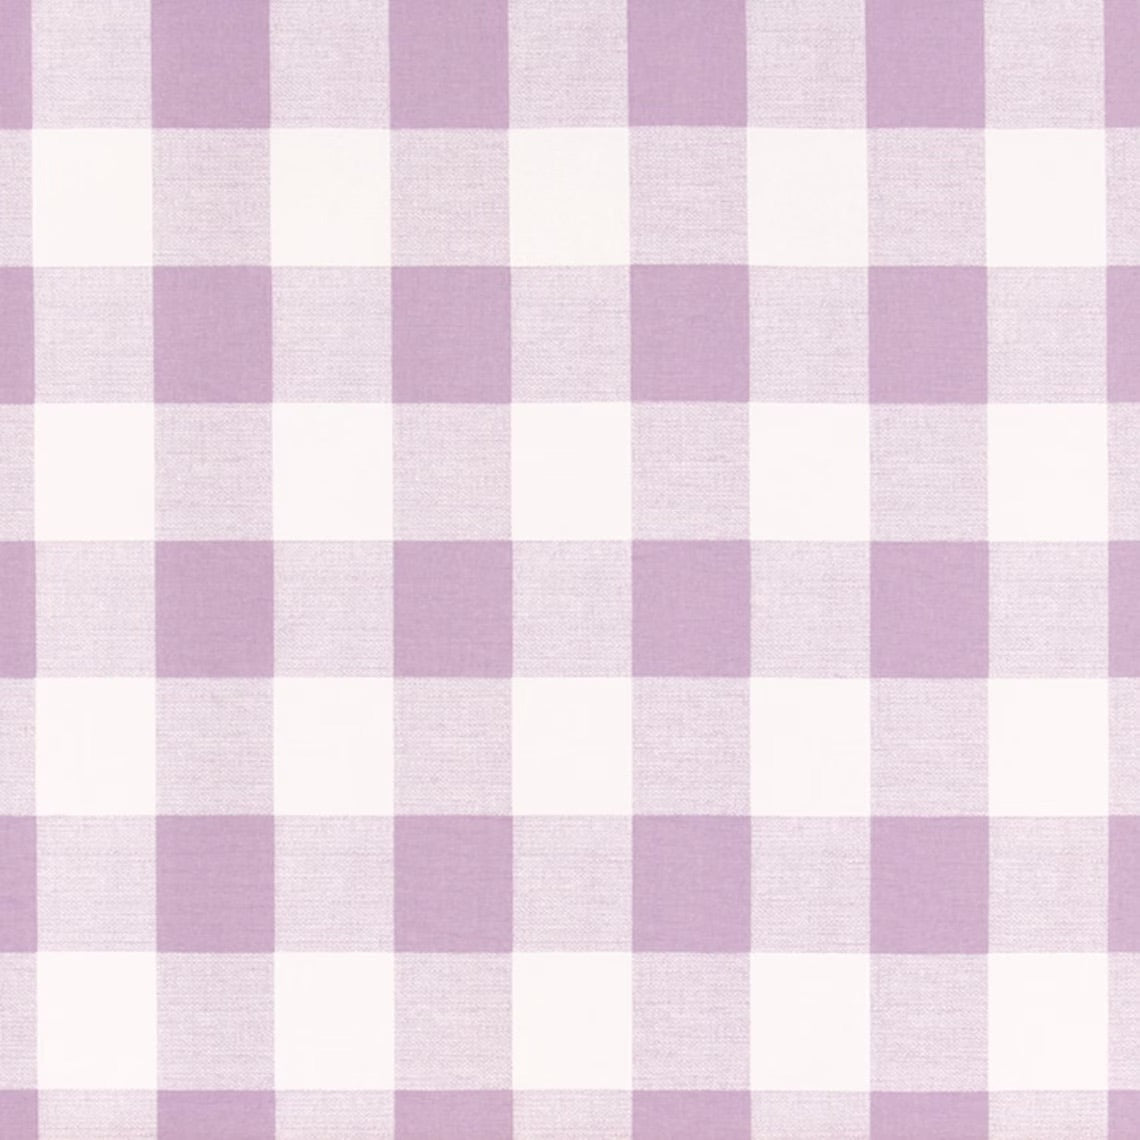 Tailored Bedskirt in Anderson Orchid Lavender Buffalo Check Plaid